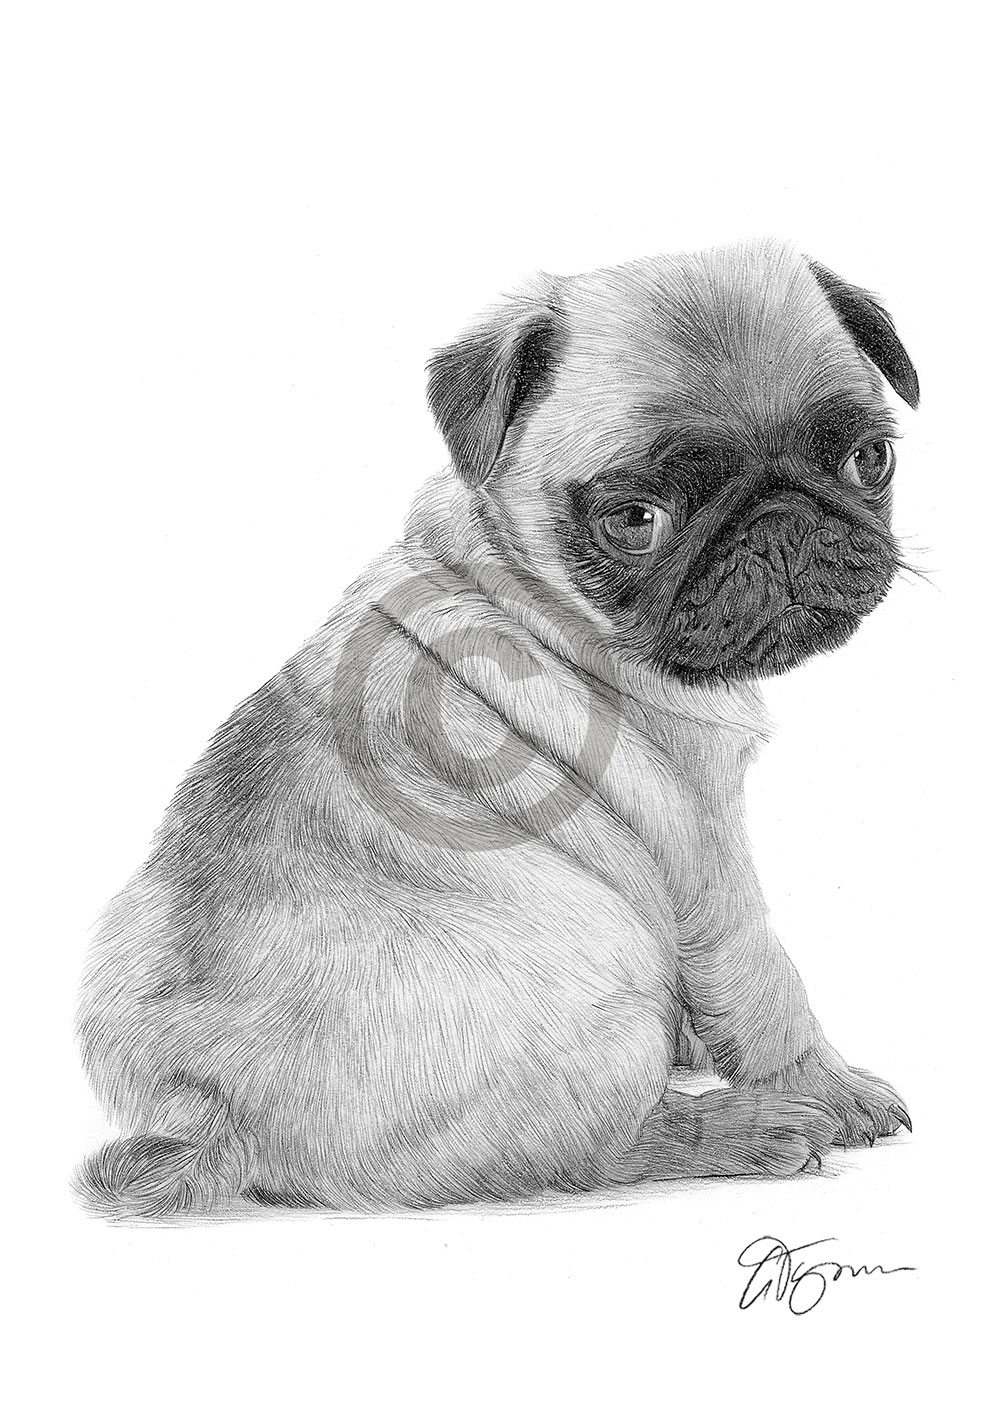 Pencil drawing of a young Pug puppy by UK artist Gary Tymon